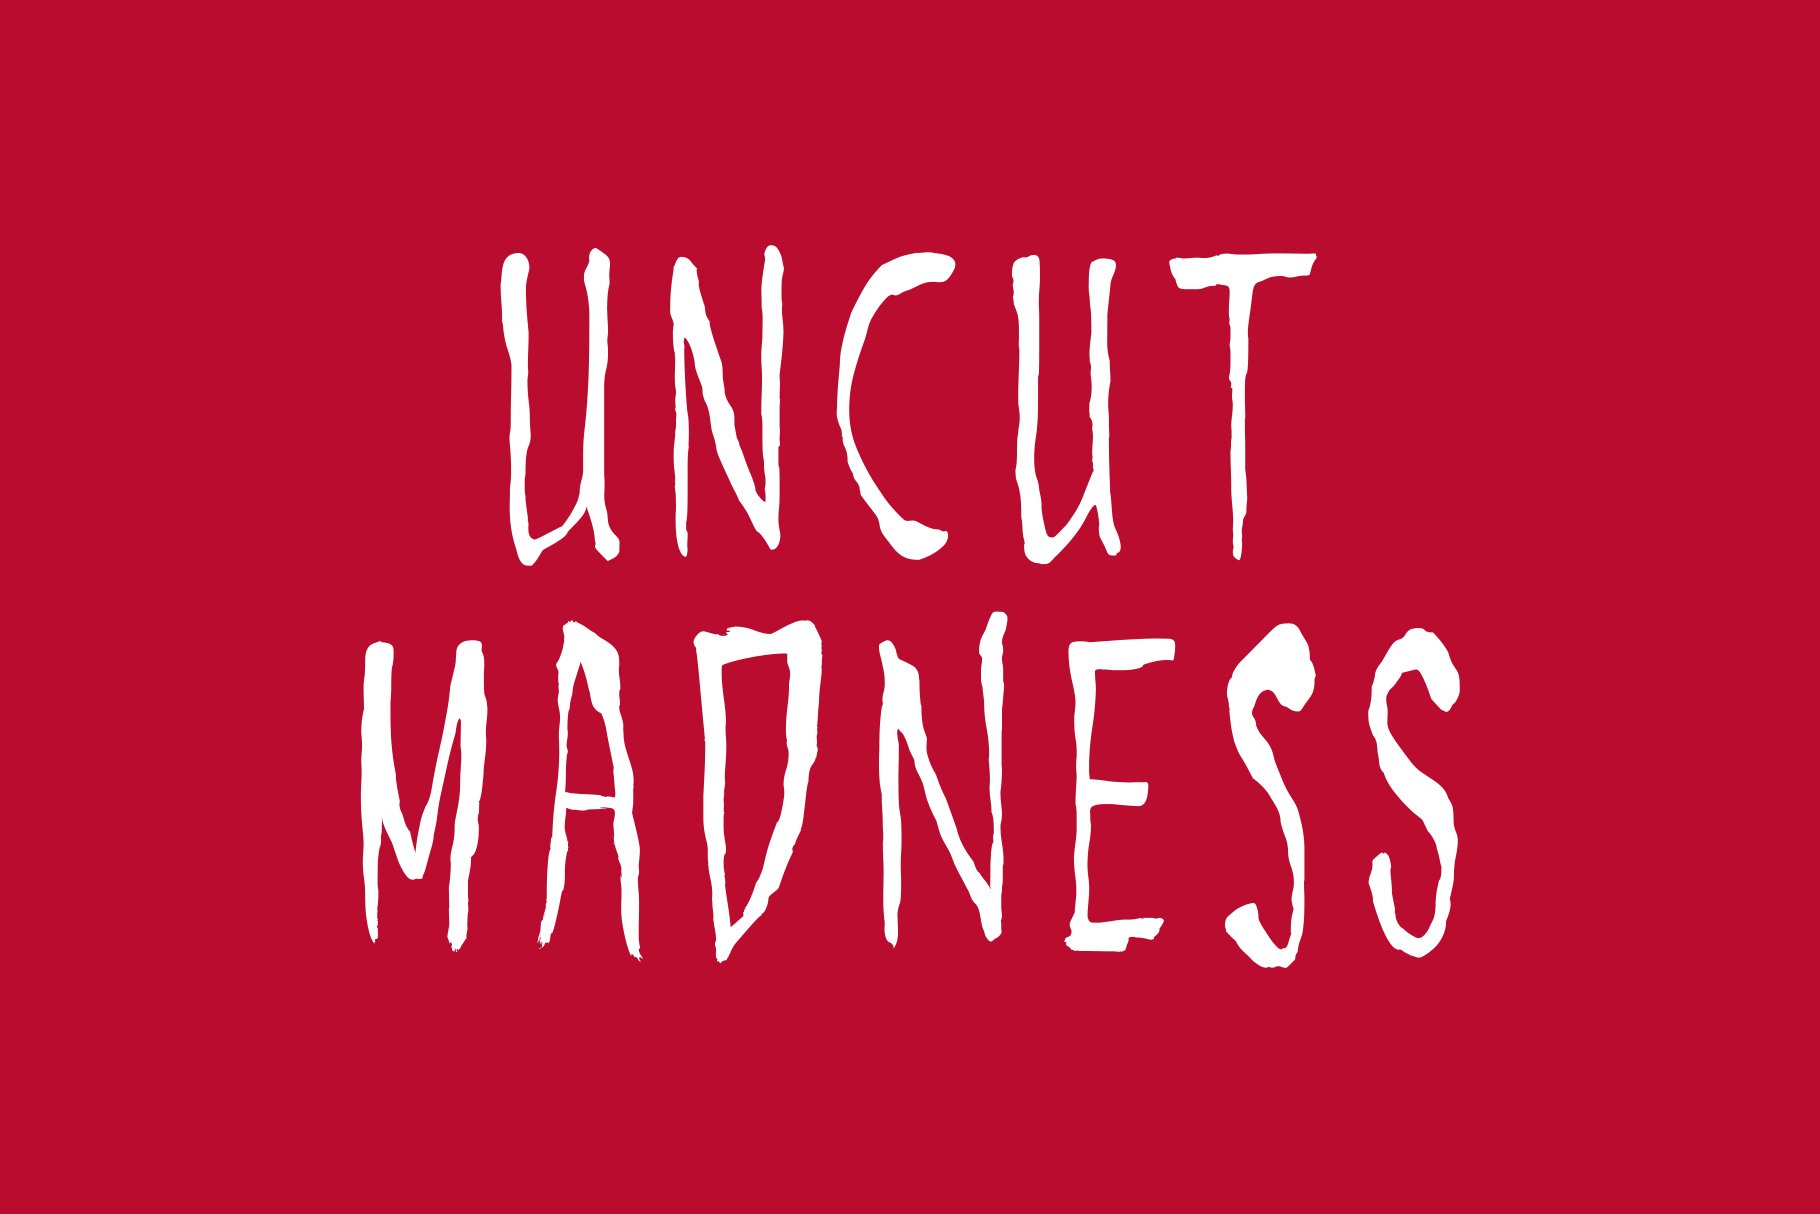 Uncut Madness cover image.